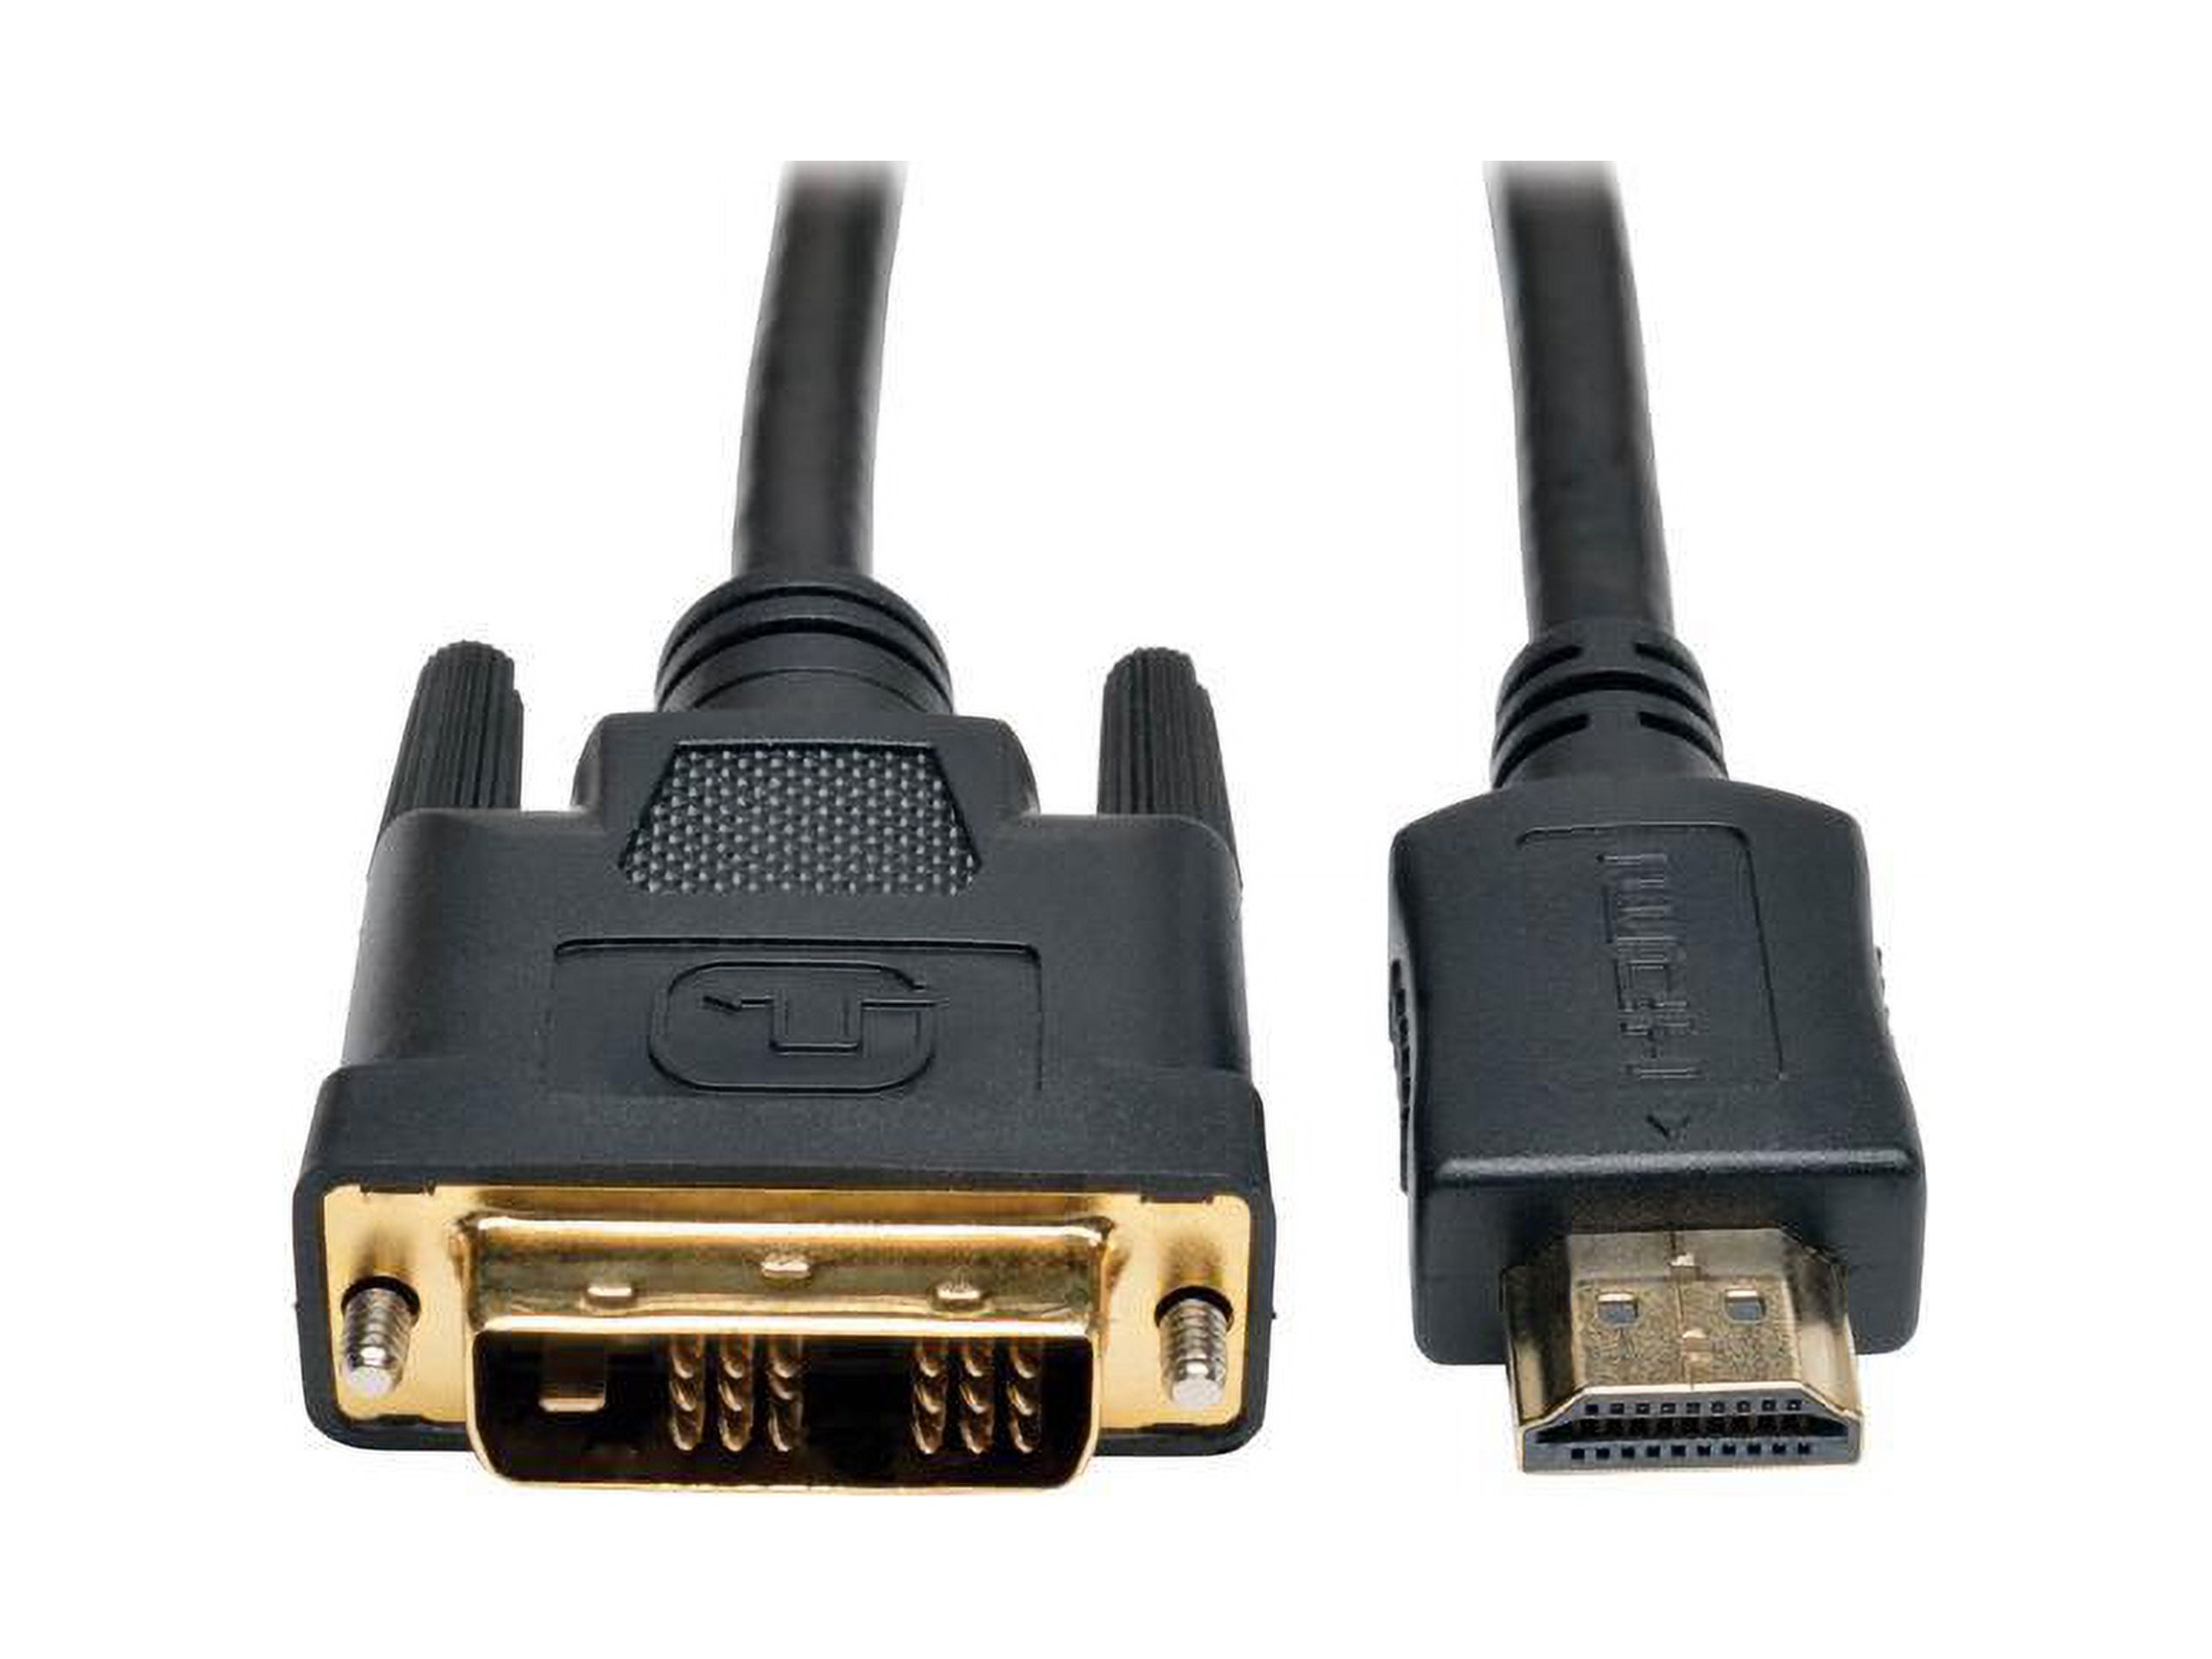 Tripp Lite HDMI to DVI Cable, Digital Monitor Adapter Cable (HDMI to DVI-D M/M), 1080P, 6-ft. (P566-006) - image 1 of 5